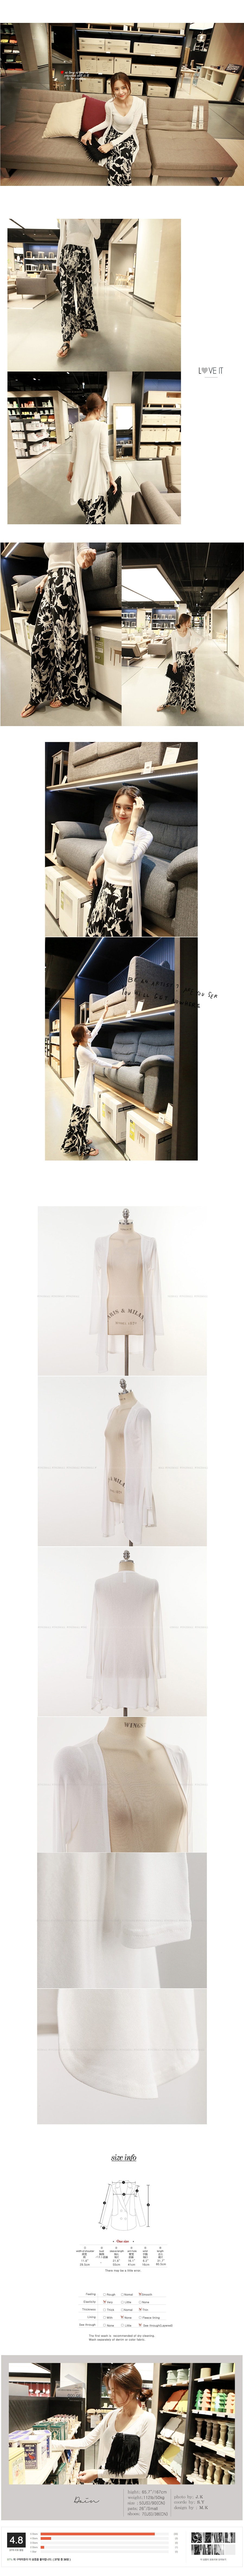 [Special Offer] Innocent White Essential Cardigan One Size(S-M)